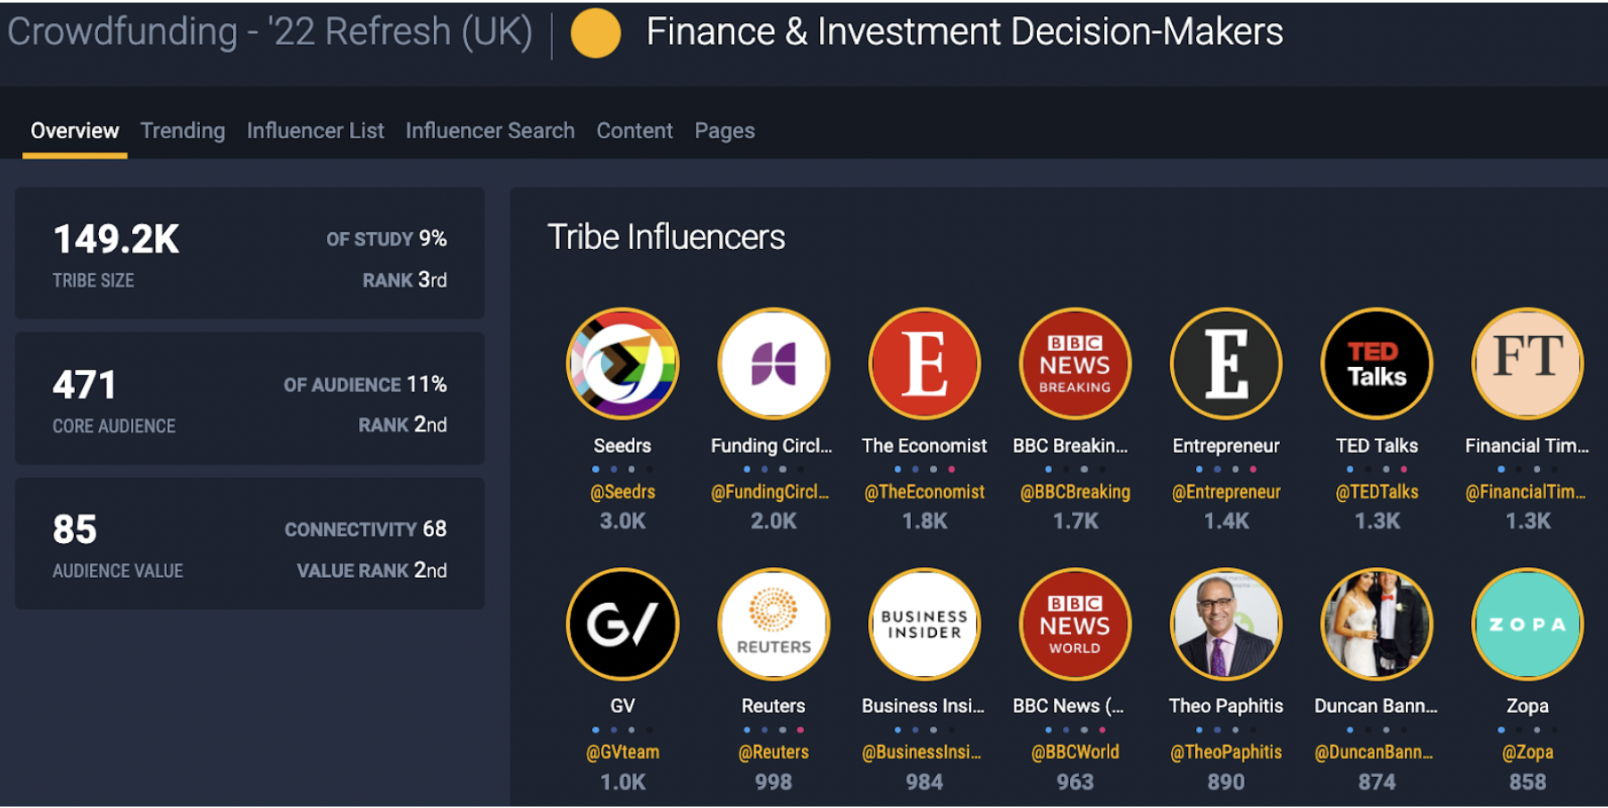 Figure 2: Top influencers amongst Finance & Investment Decision Makers included Seedrs, The Economist and Financial Times.